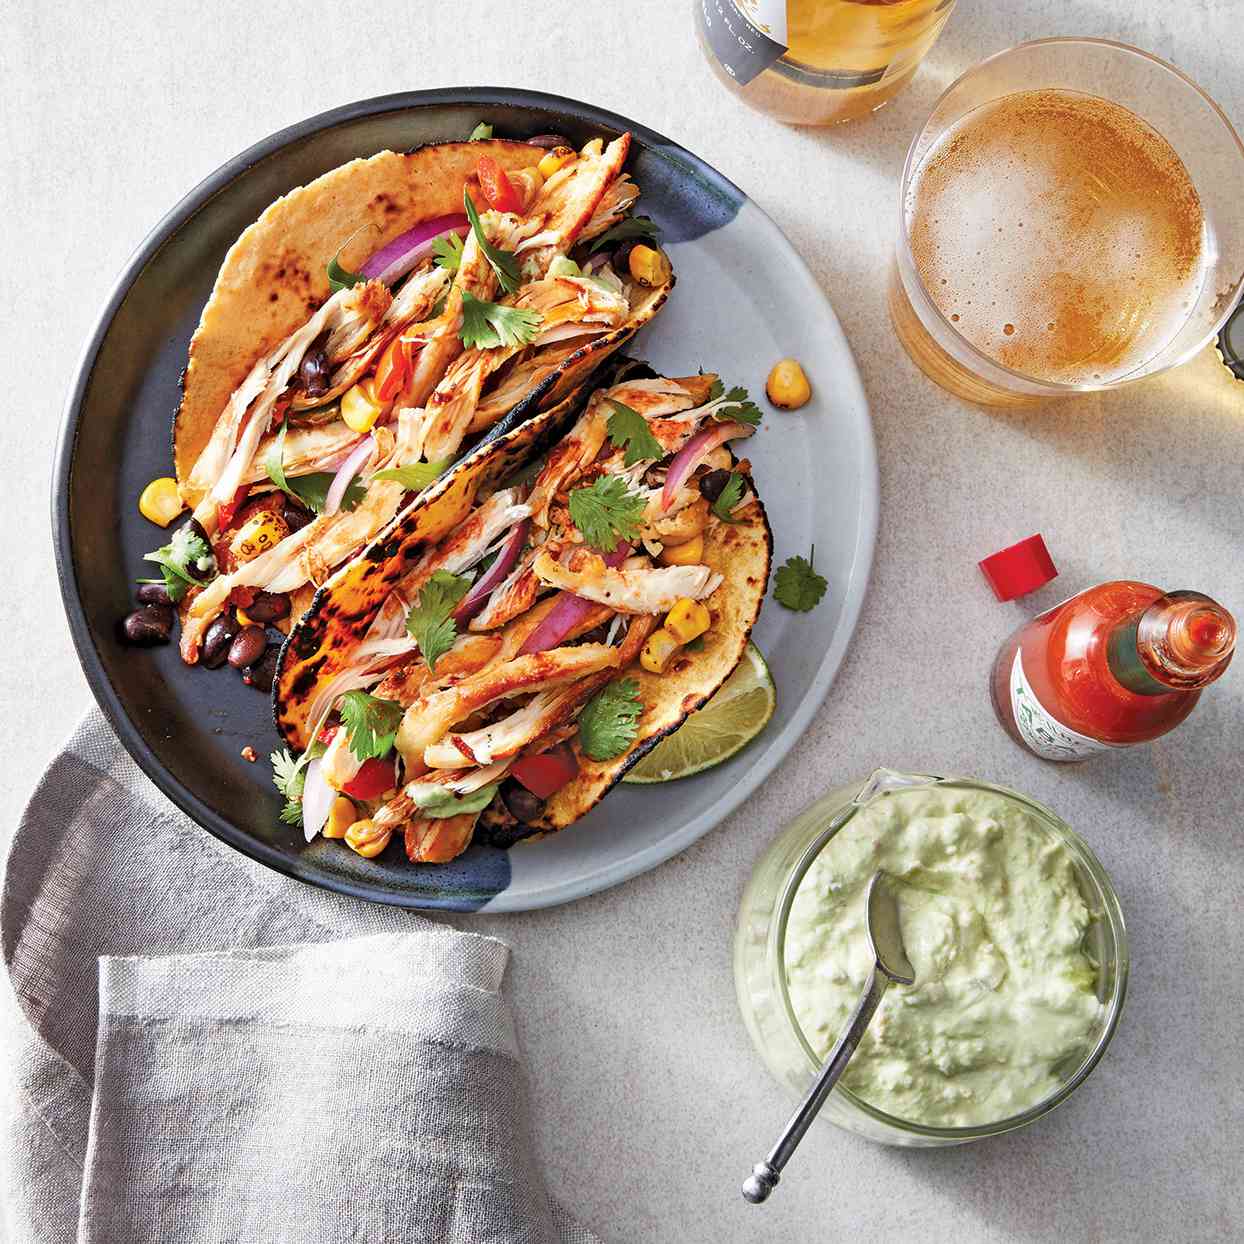 <p>A rich, creamy topping made of mashed avocado, sour cream, lime juice and salt takes these spicy slow-cooker chicken tacos to the next level. Lightly toast the tortillas, if desired. Use any leftover avocado cream as a chip dip, and serve with tortilla chips.</p>
                            